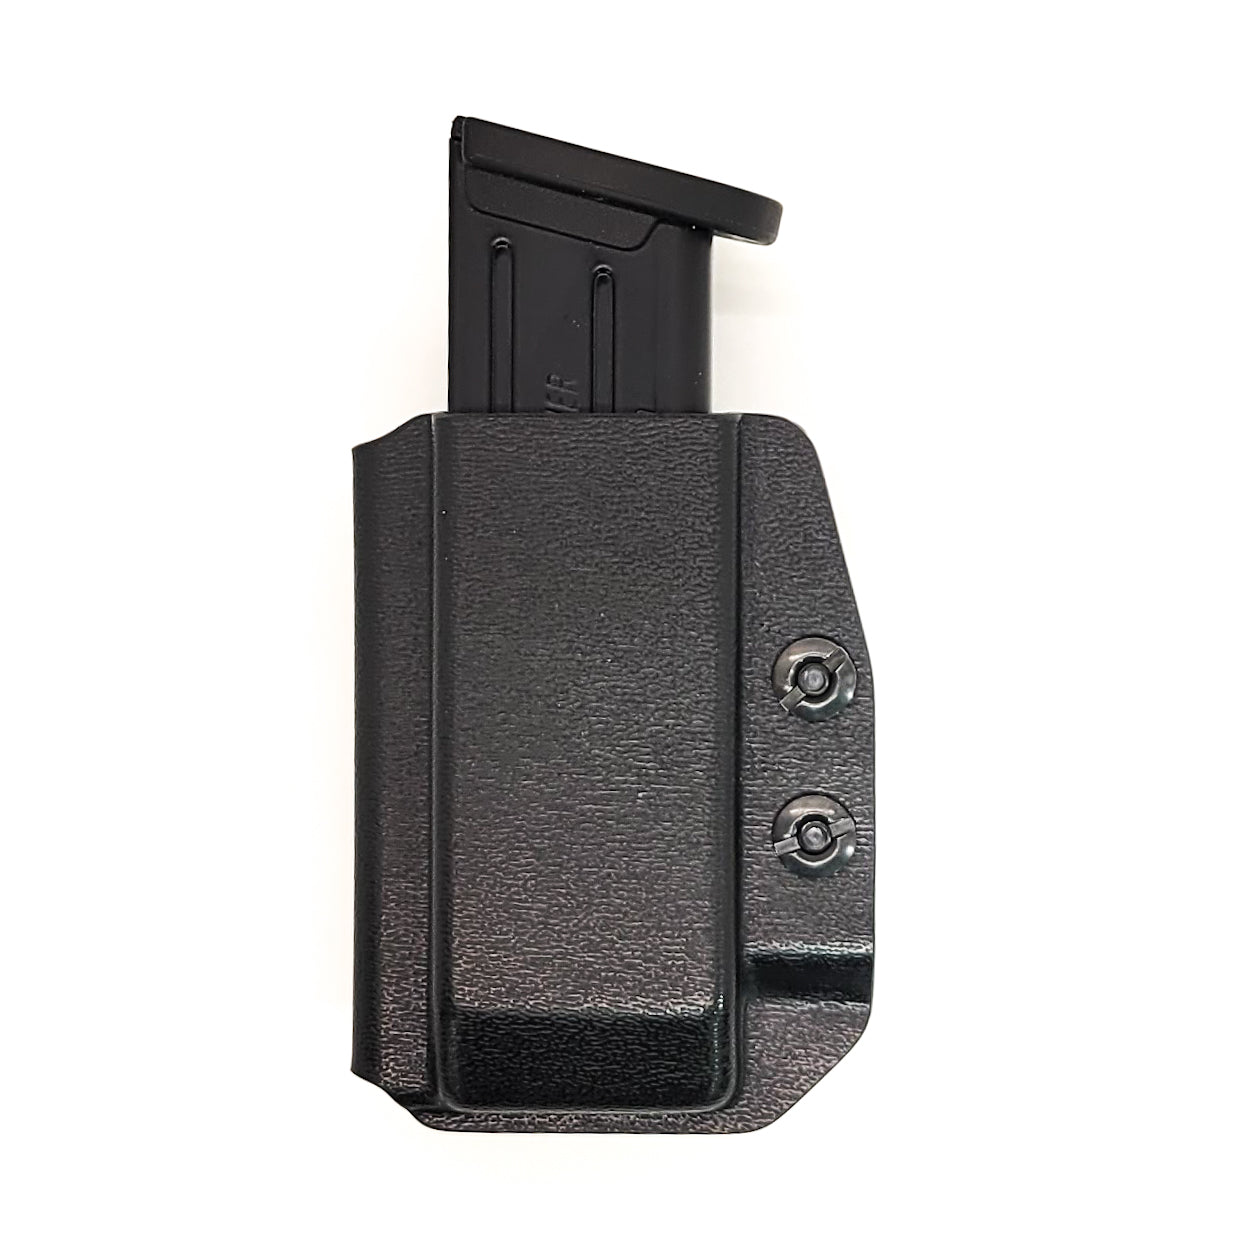 For the best, Inside Waistband IWB AIWB universal magazine carrier, holster, & pouch for the Sig P320, P365, P365XL, Glock 17, 17L, 19, 22, 23, 26, 27, 34, 35, 45, 31, 32, 33, .357 Sig, 9mm & 40 Walther, Smith & Wesson, Arex, H&K, and 509, 509T, LS EDGE FN magazines, shop Four Brothers Holsters. 4BROS, Made in the USA